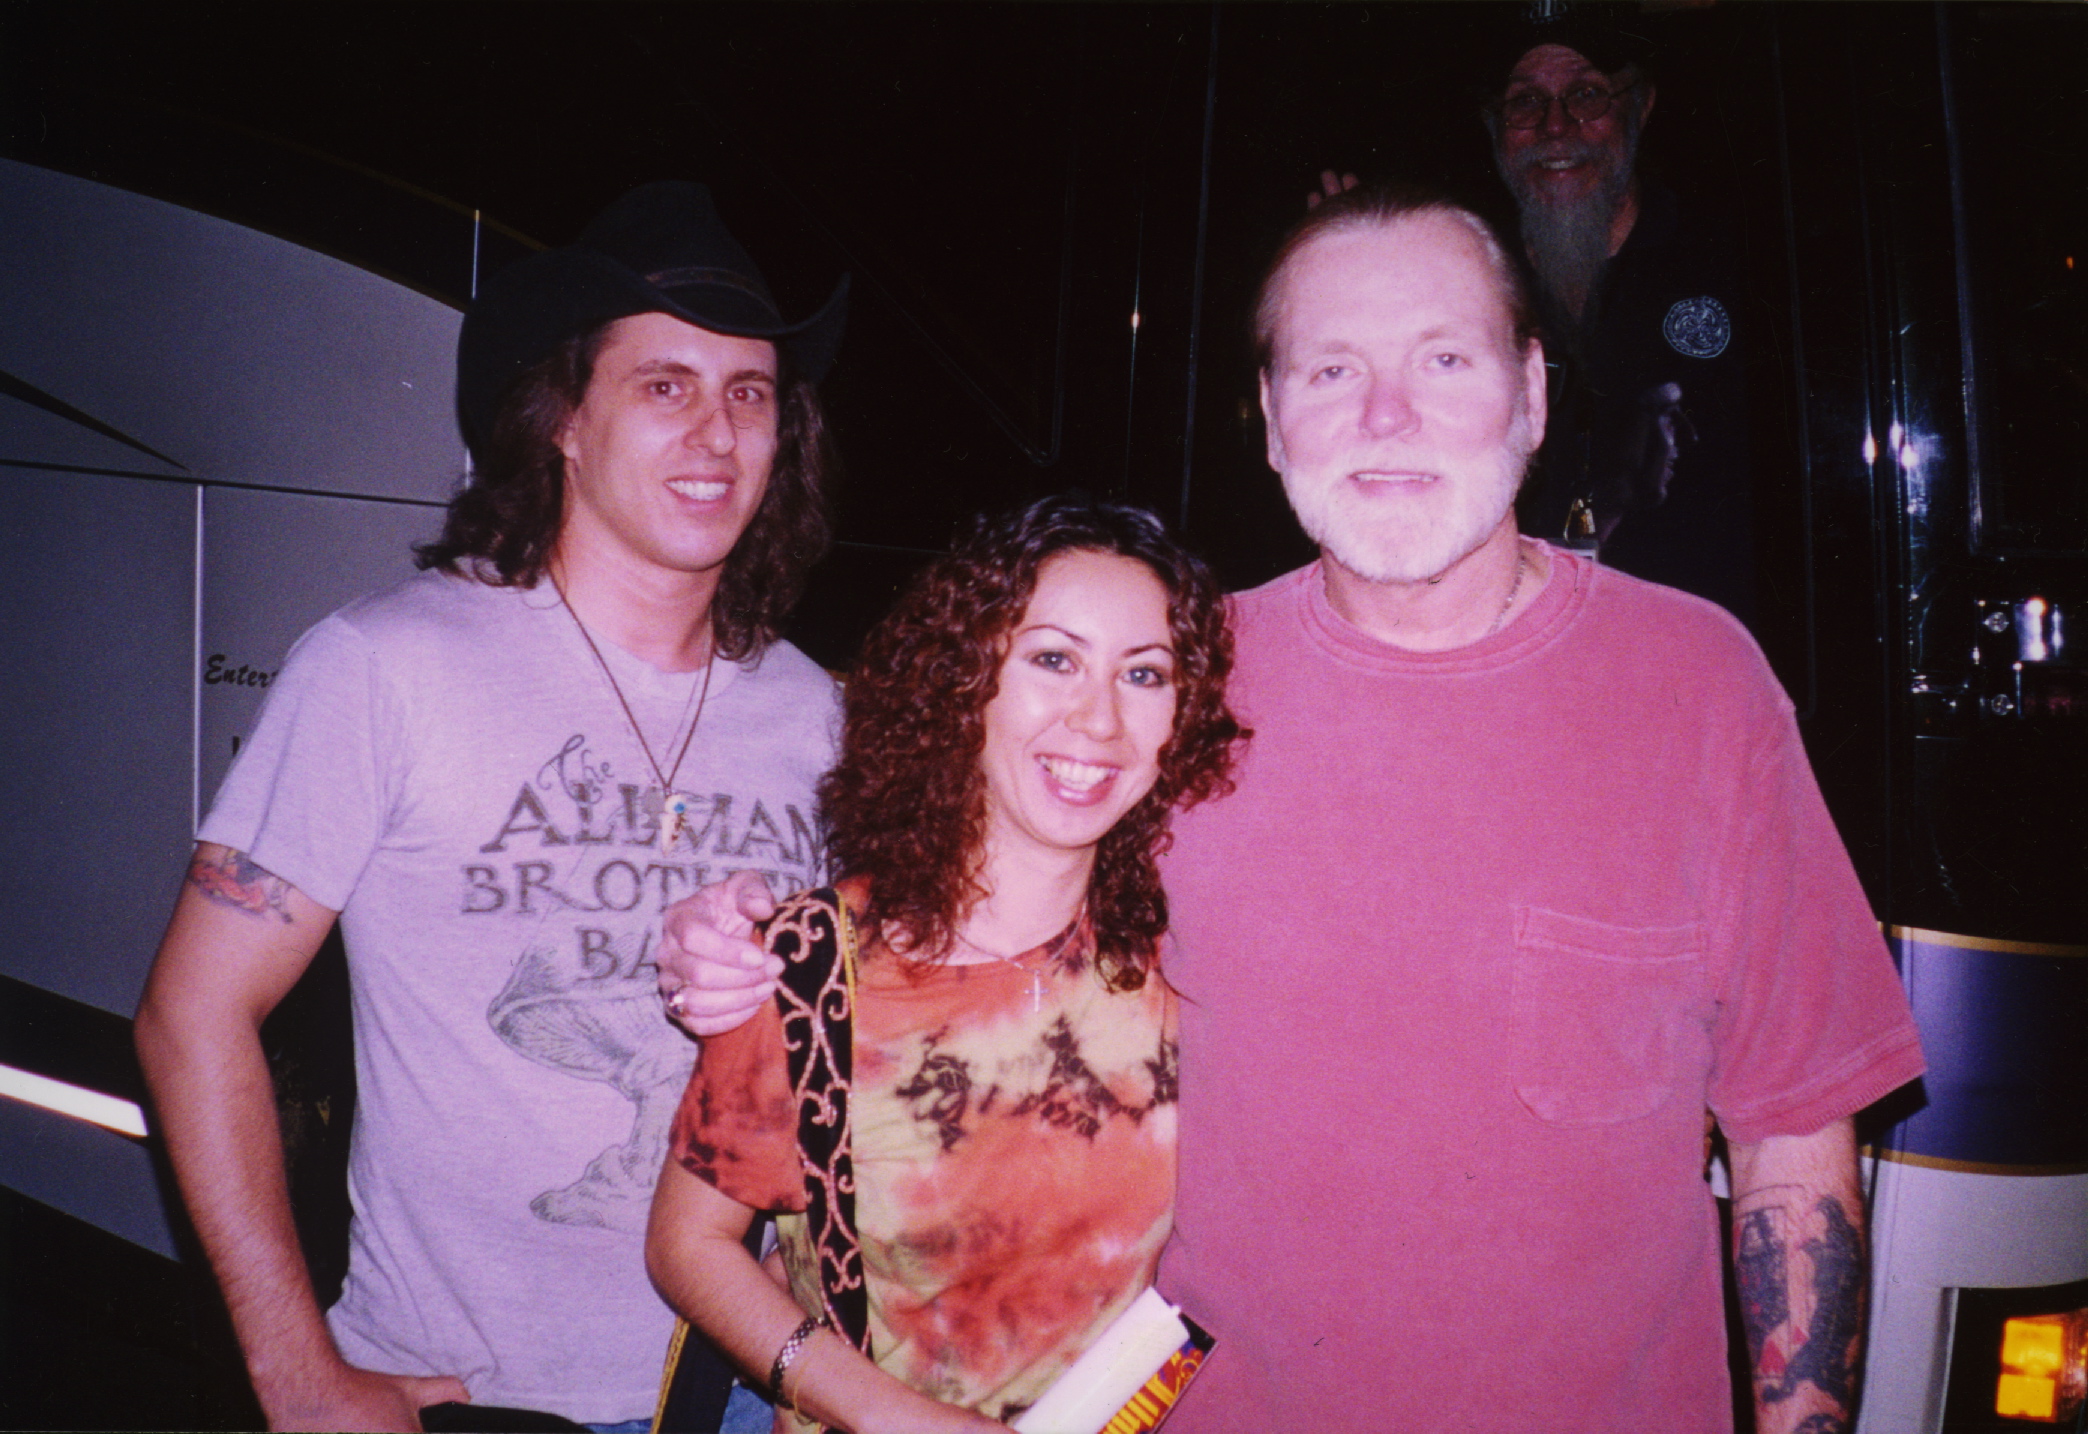 J.J. Vicars and his wife with Gregg after the Brother's show at The Joint,Hard Rock Hotel,Las Vegas on September 13th,2003.This photo is also available on J.J.'s website.